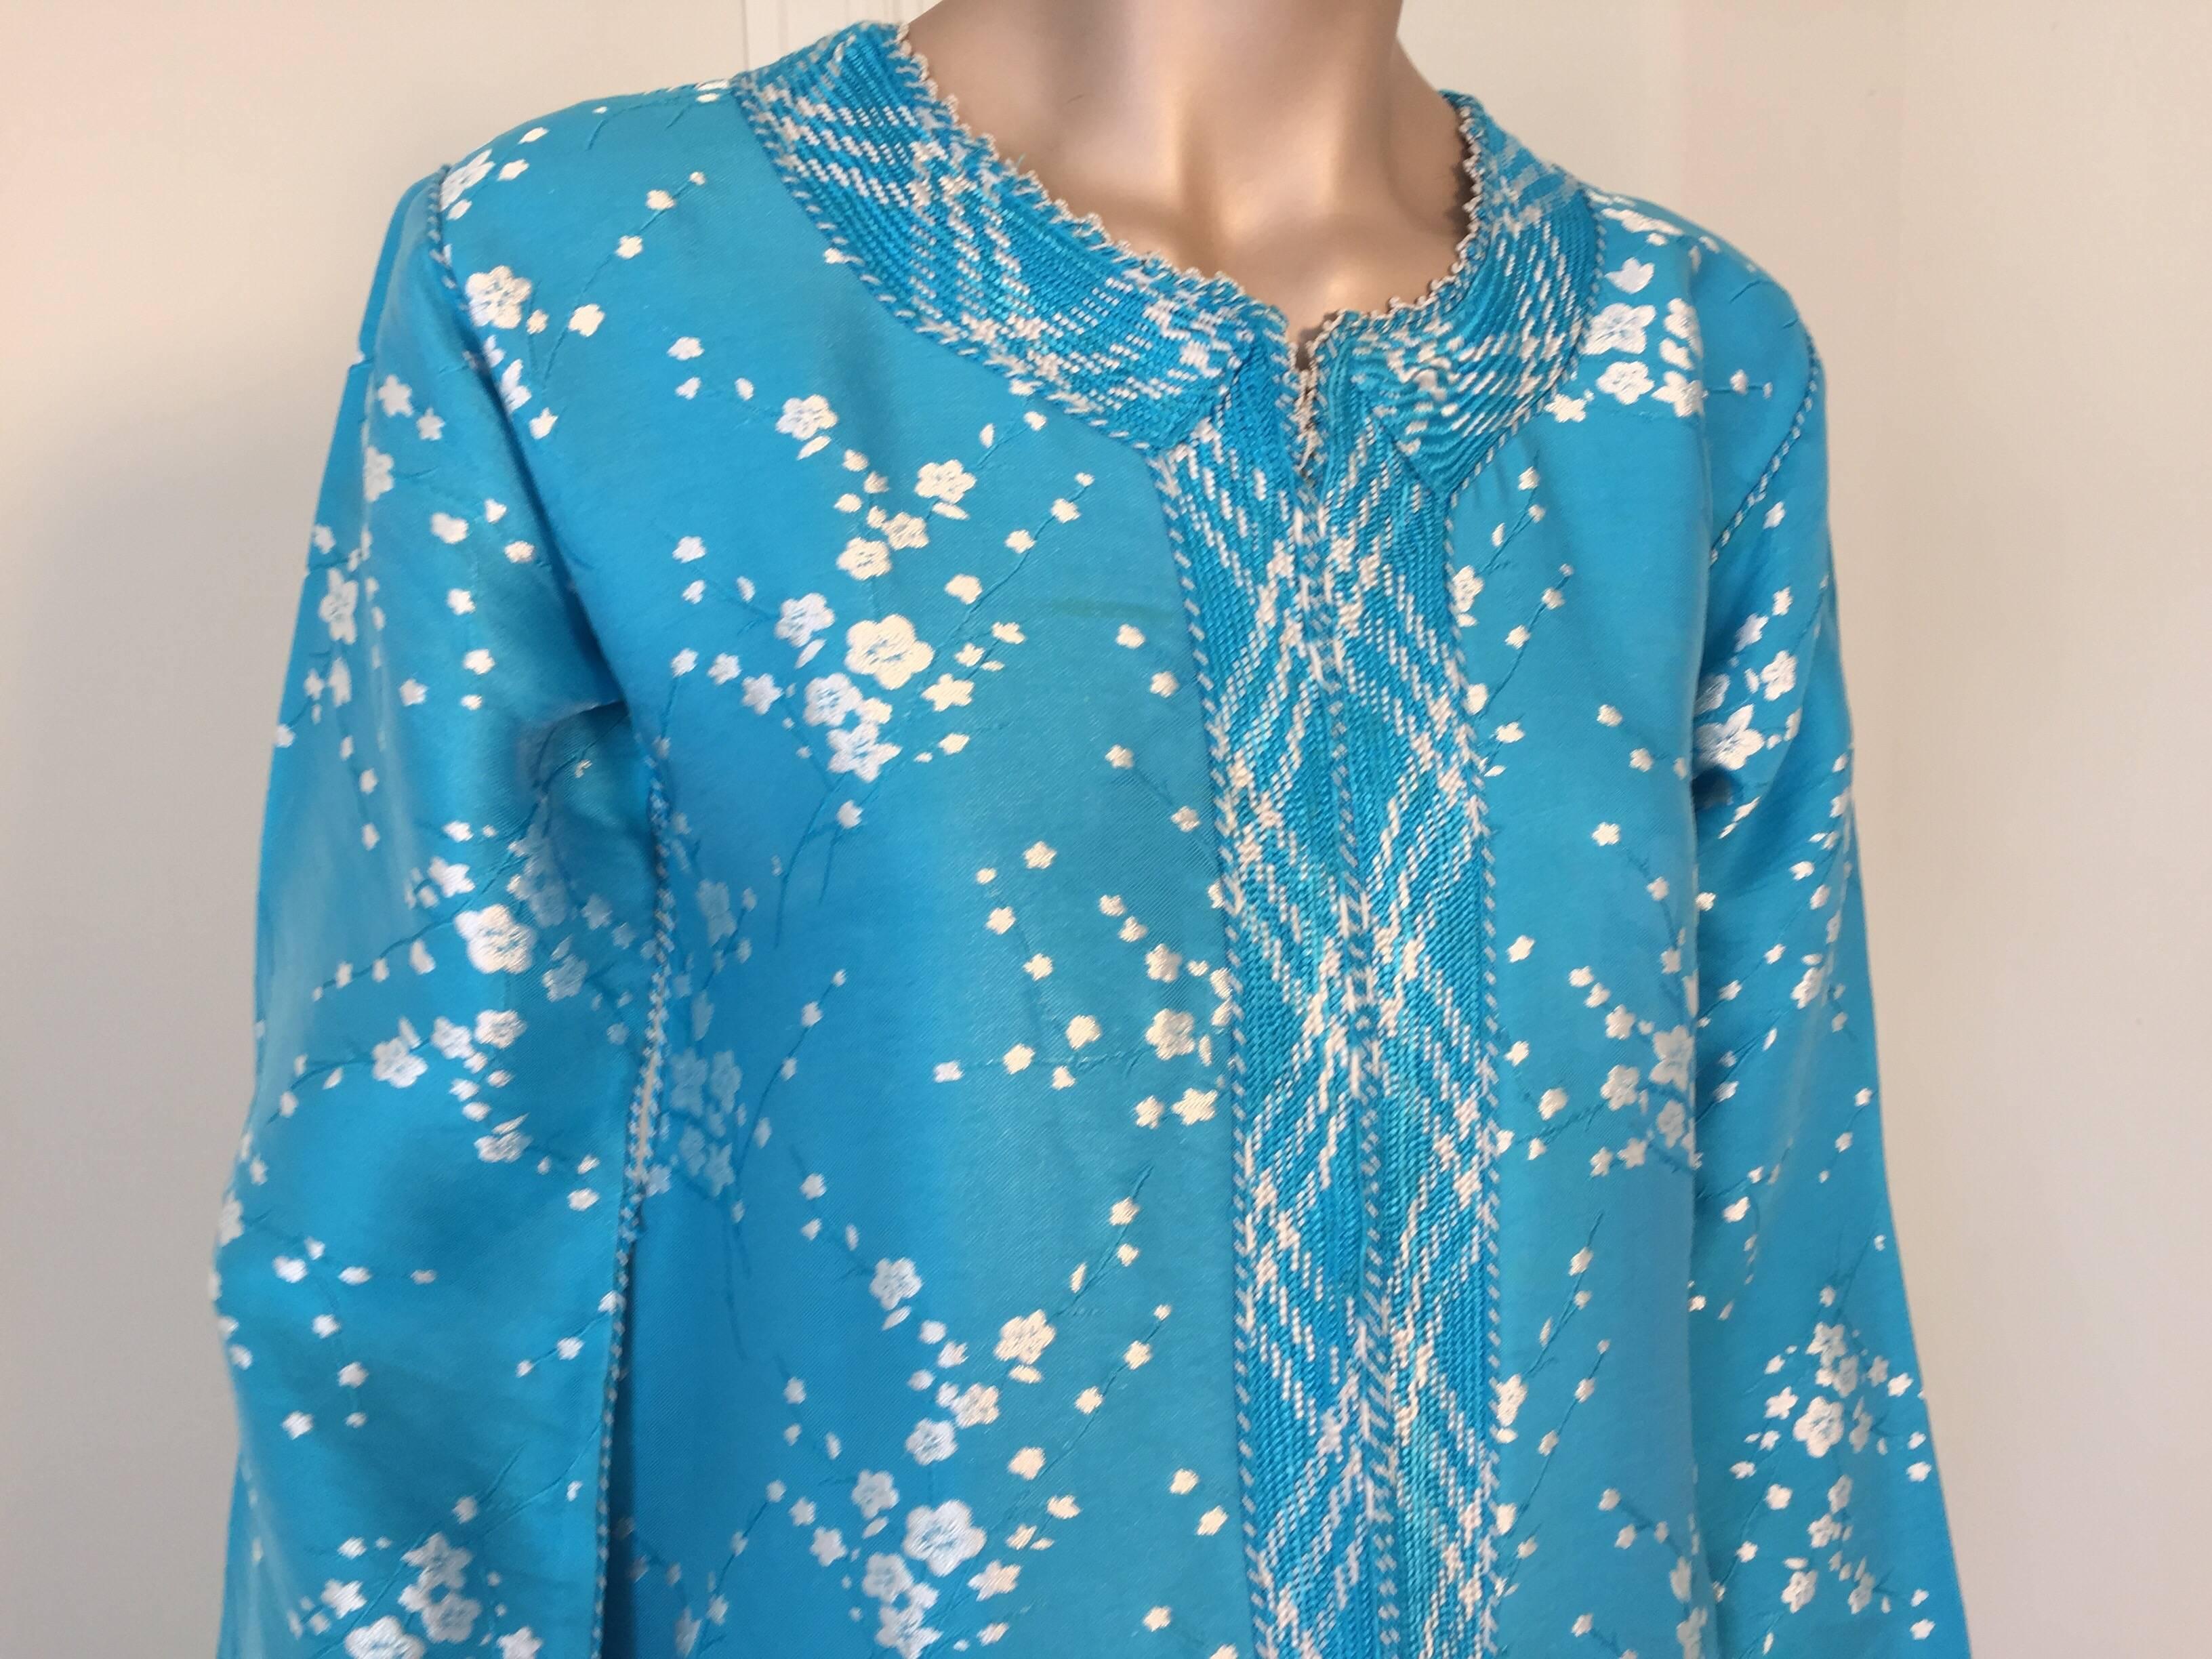 Vintage Moroccan Designer Kaftan Turquoise Maxi Dress Kaftan Small In Good Condition For Sale In North Hollywood, CA